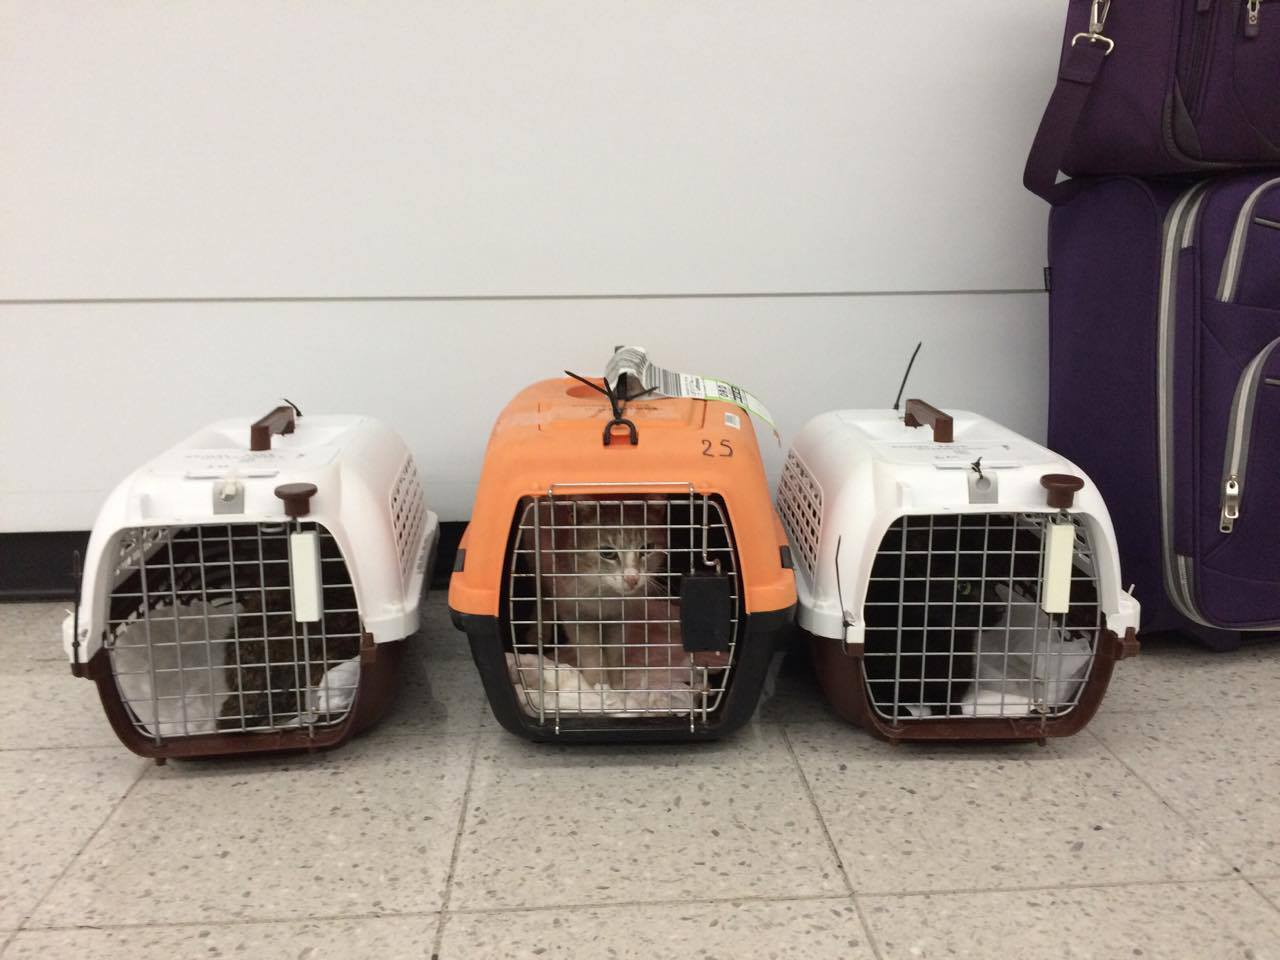 Arriving in Chicago with two other cats from Amorgos